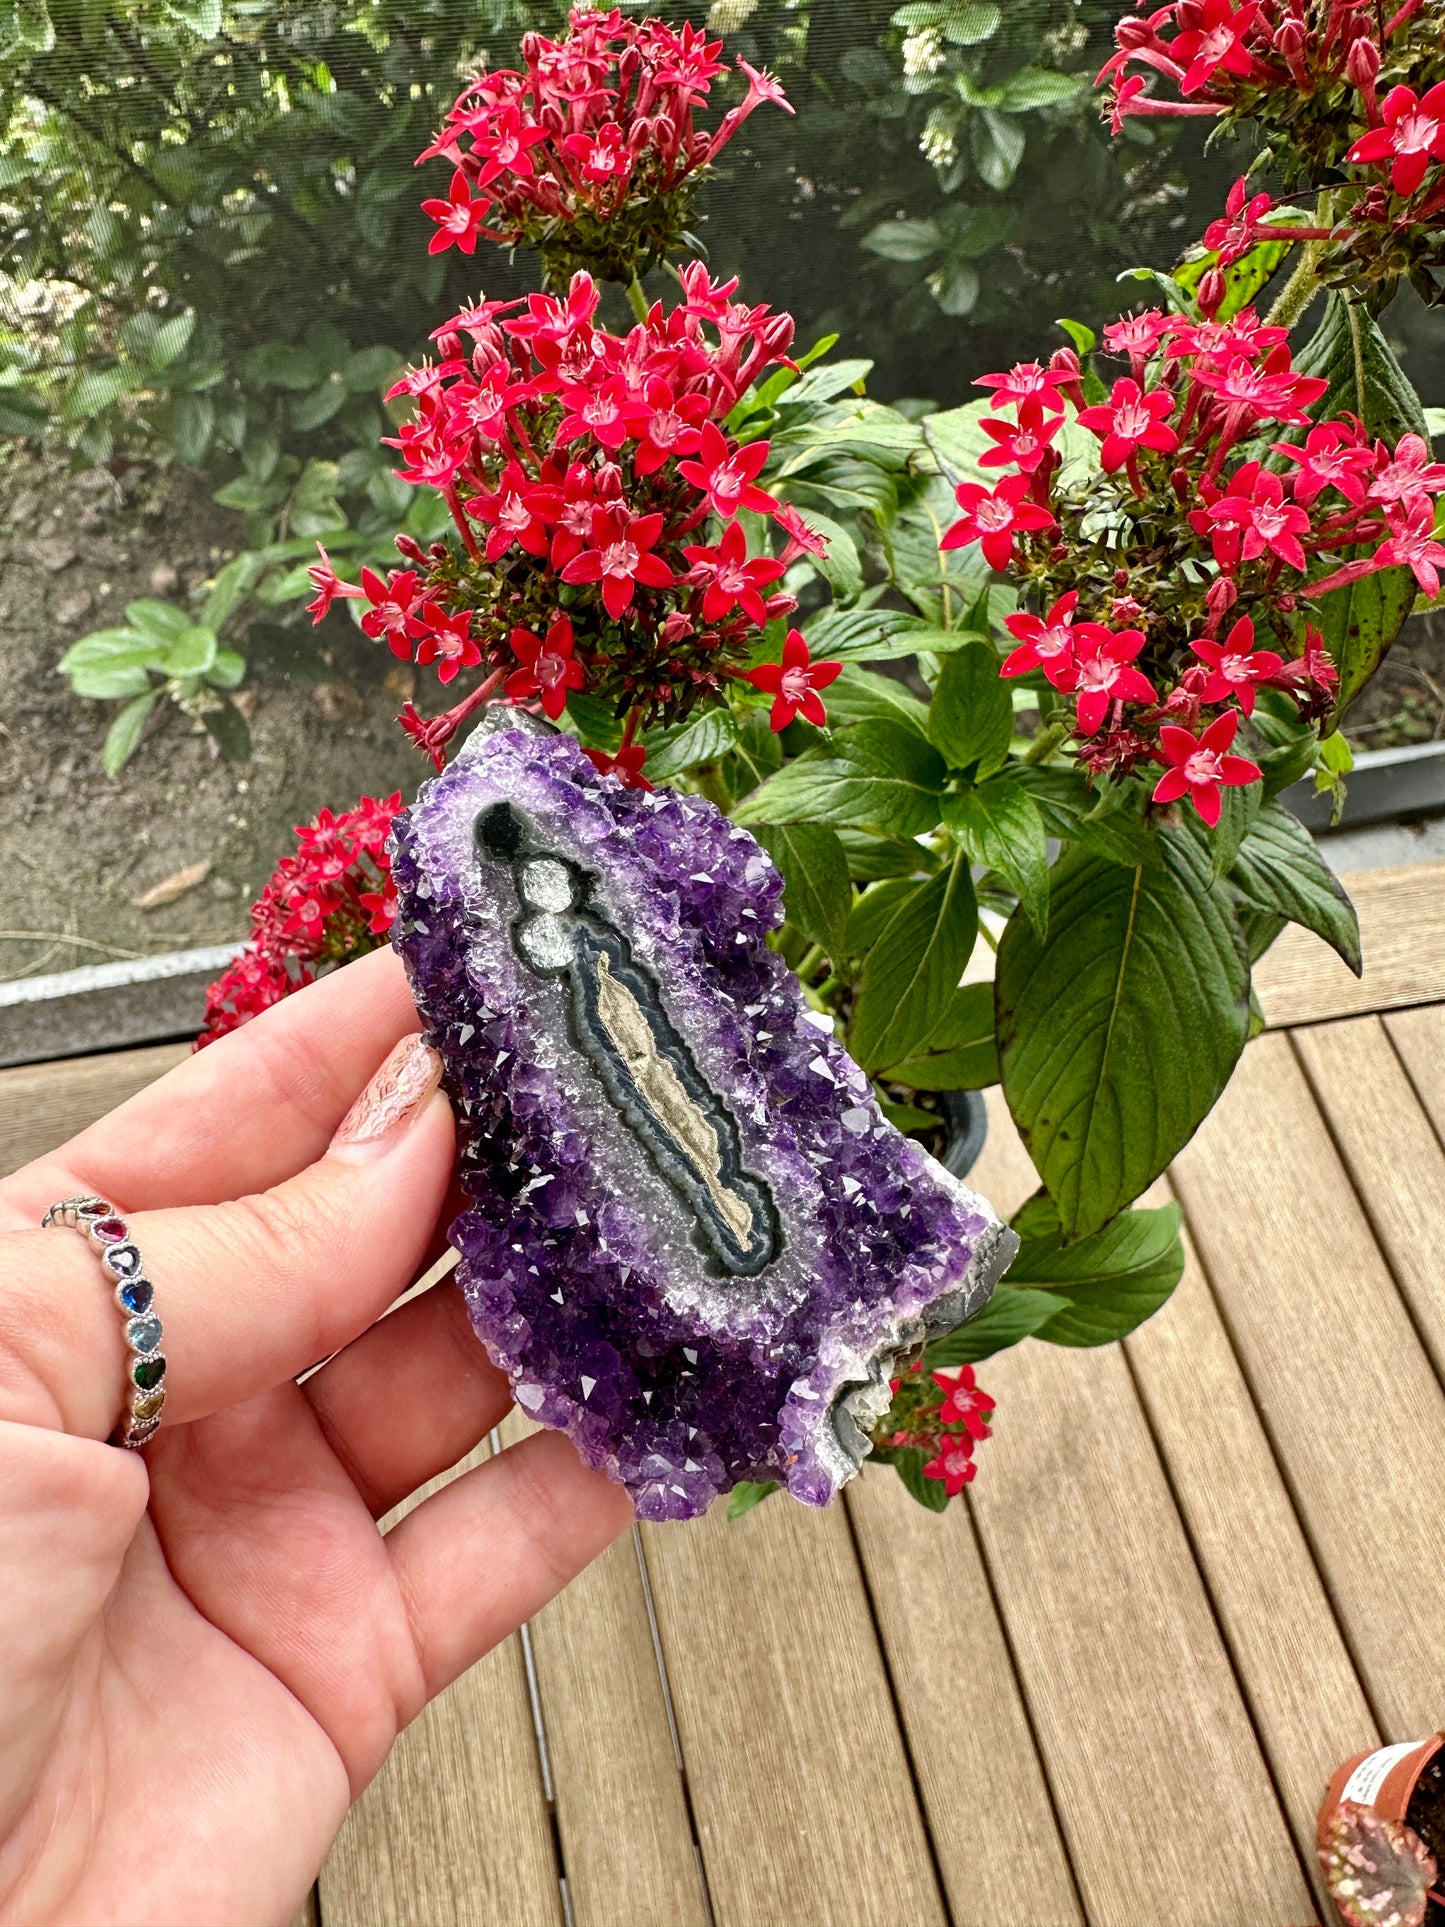 Exquisite Uruguayan Amethyst Stalactite - A Majestic Natural Wonder for Collectors and Decor Enthusiasts